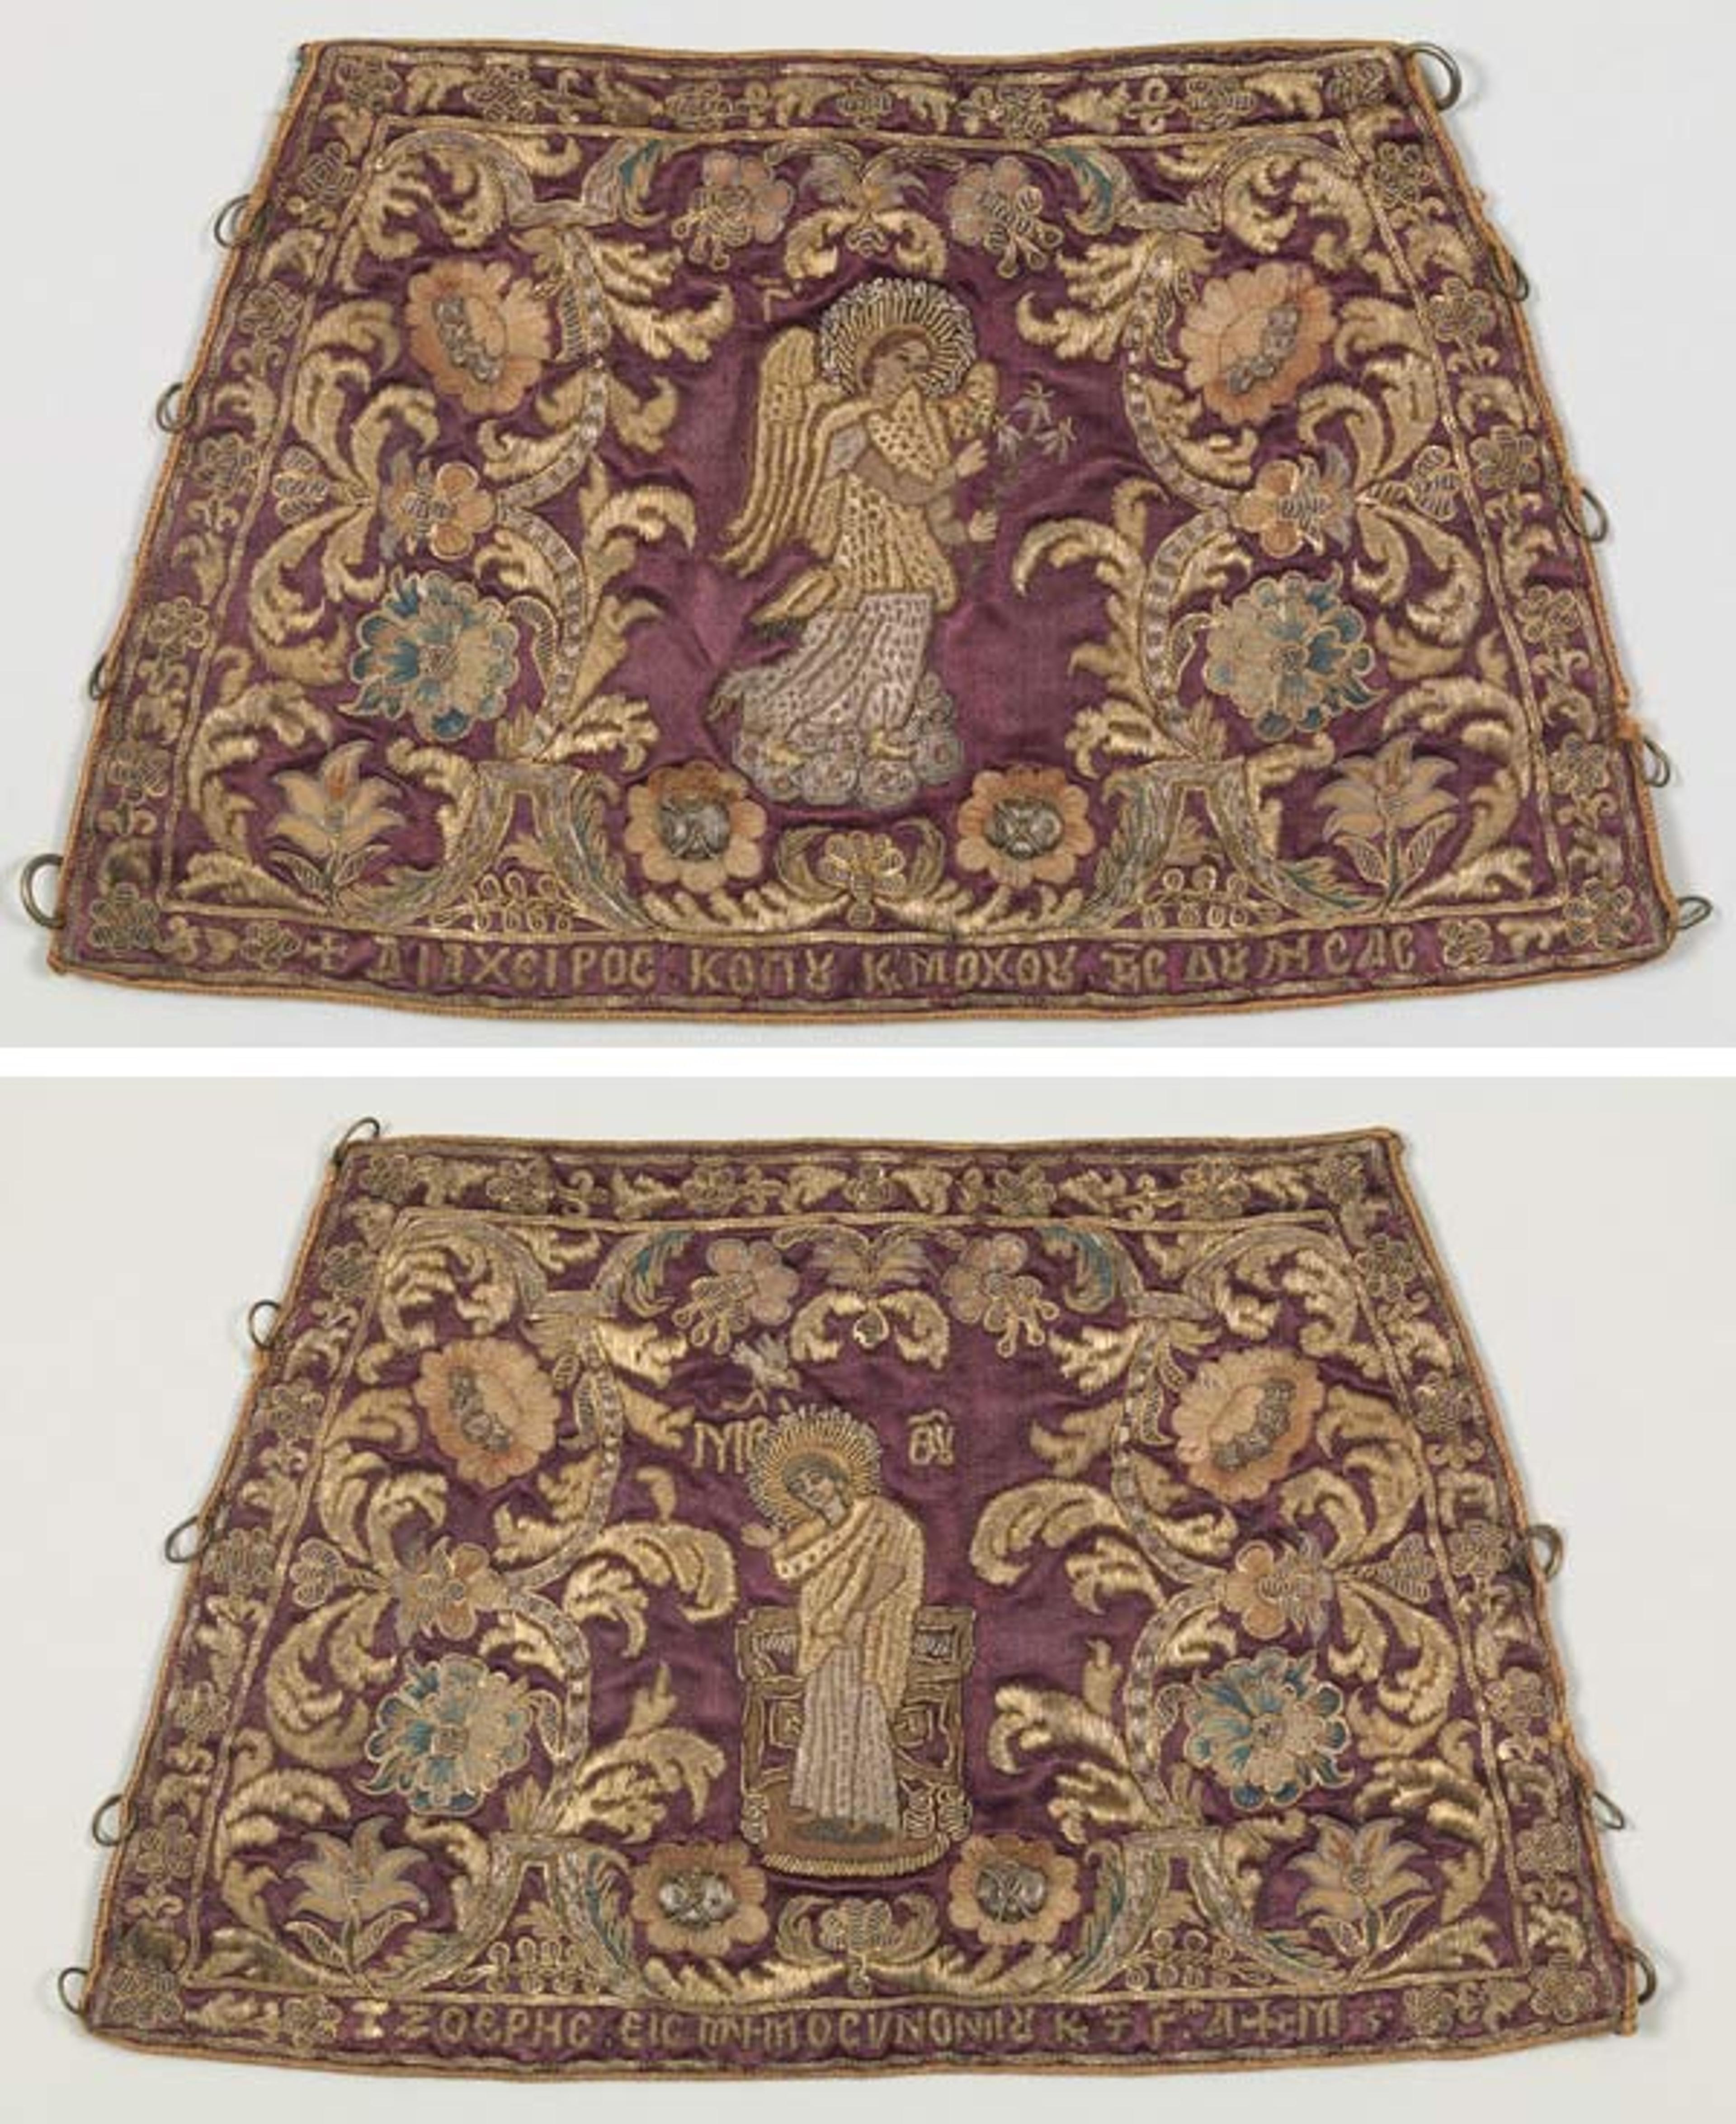 Liturgical cuffs (epimanikion), 1740. Greek. Silk, metal thread, and metal wire embroidery on a foundation of silk satin; 9 3/4 x 5 3/4 in. (24.8 x 14.6 cm). The Metropolitan Museum of Art, New York, Gift of George Blumenthal, 1941 (41.100.235 [top], 41.100.234 [bottom])